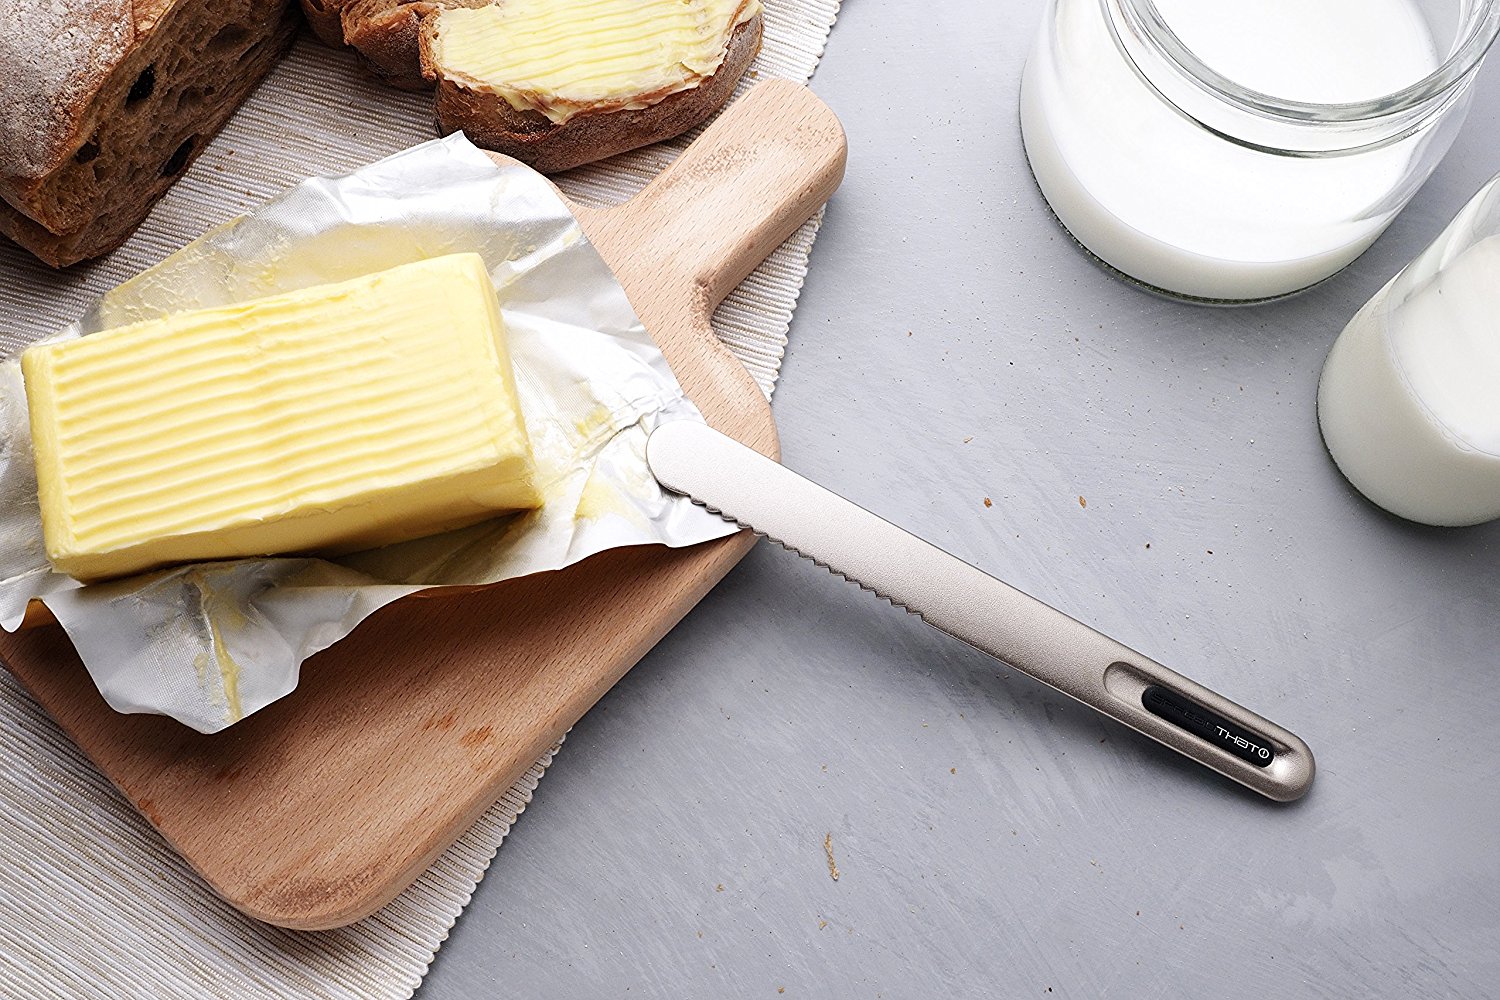 THAT! Spread That Serrated Warming Butter Knife